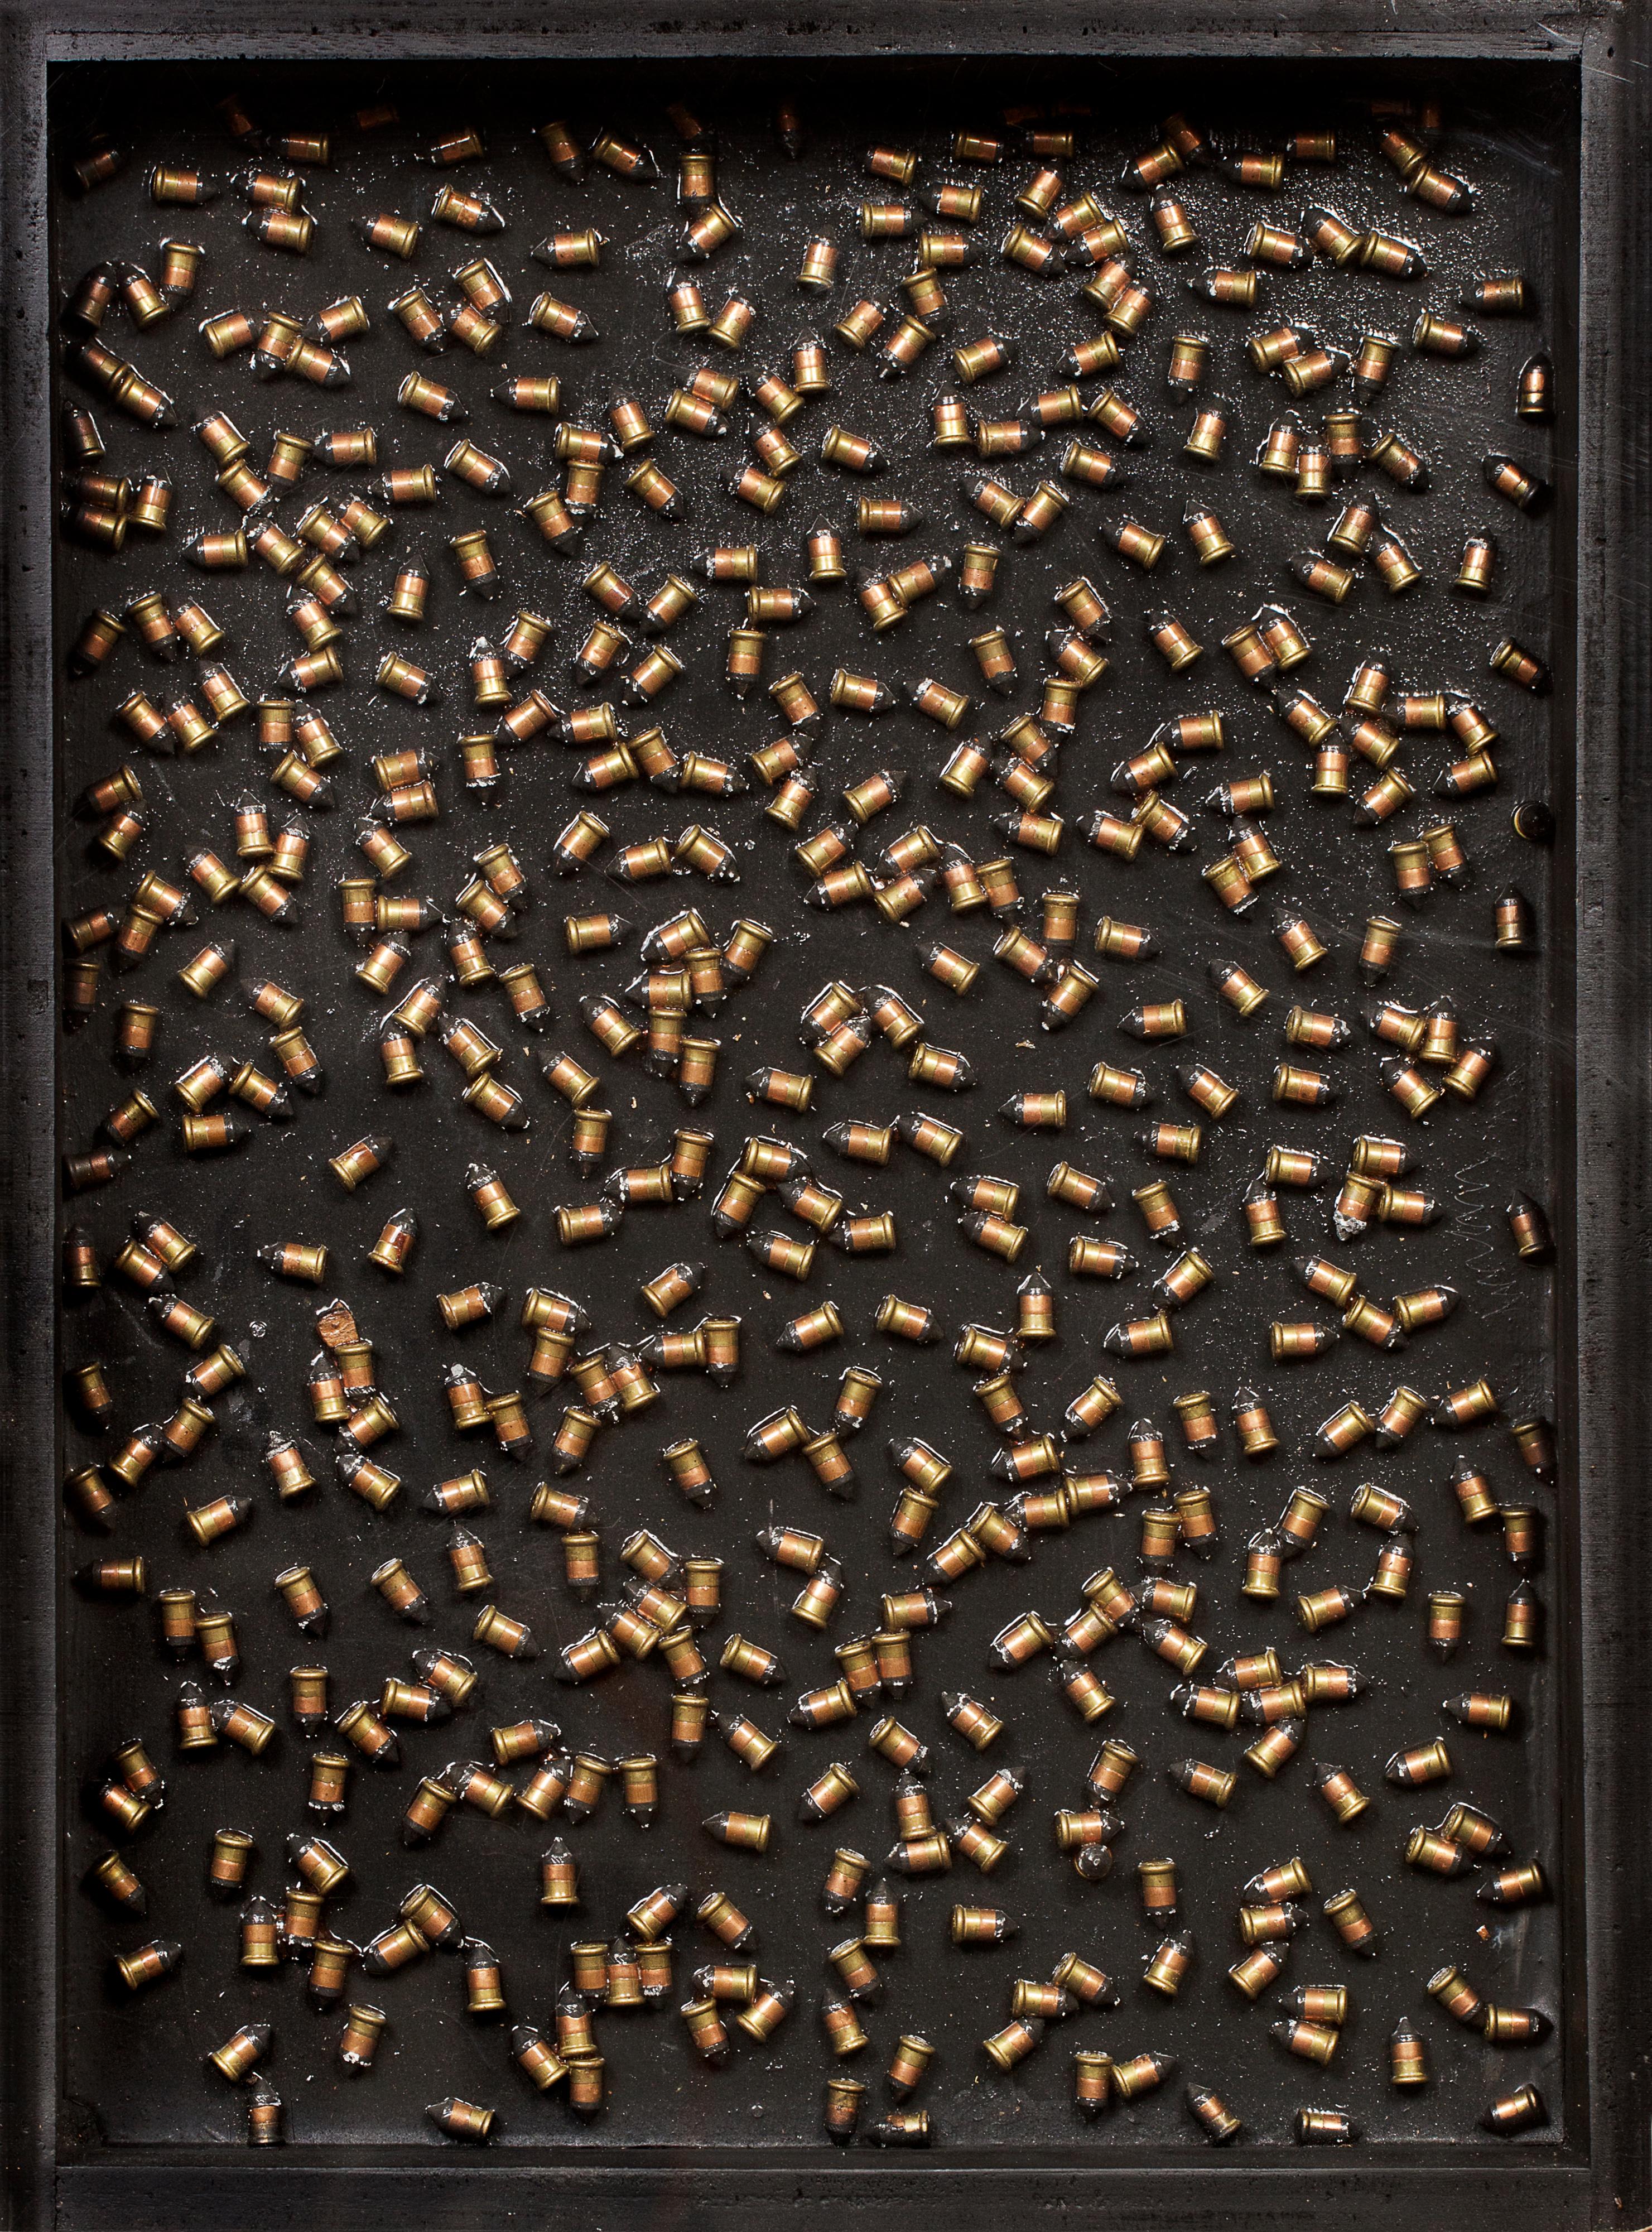 Arman (1928-2005)
À coups trop tirés, 1962
Accumulation of .22 caliber bullets in a wooden box
40 x 30 x 7 cm
15 3/4 x 11 7/8 x 2 3/4 in

This work is recorded in the Arman Studio Archives New York under number: APA# 8002.62.001

Provenance:
Galerie